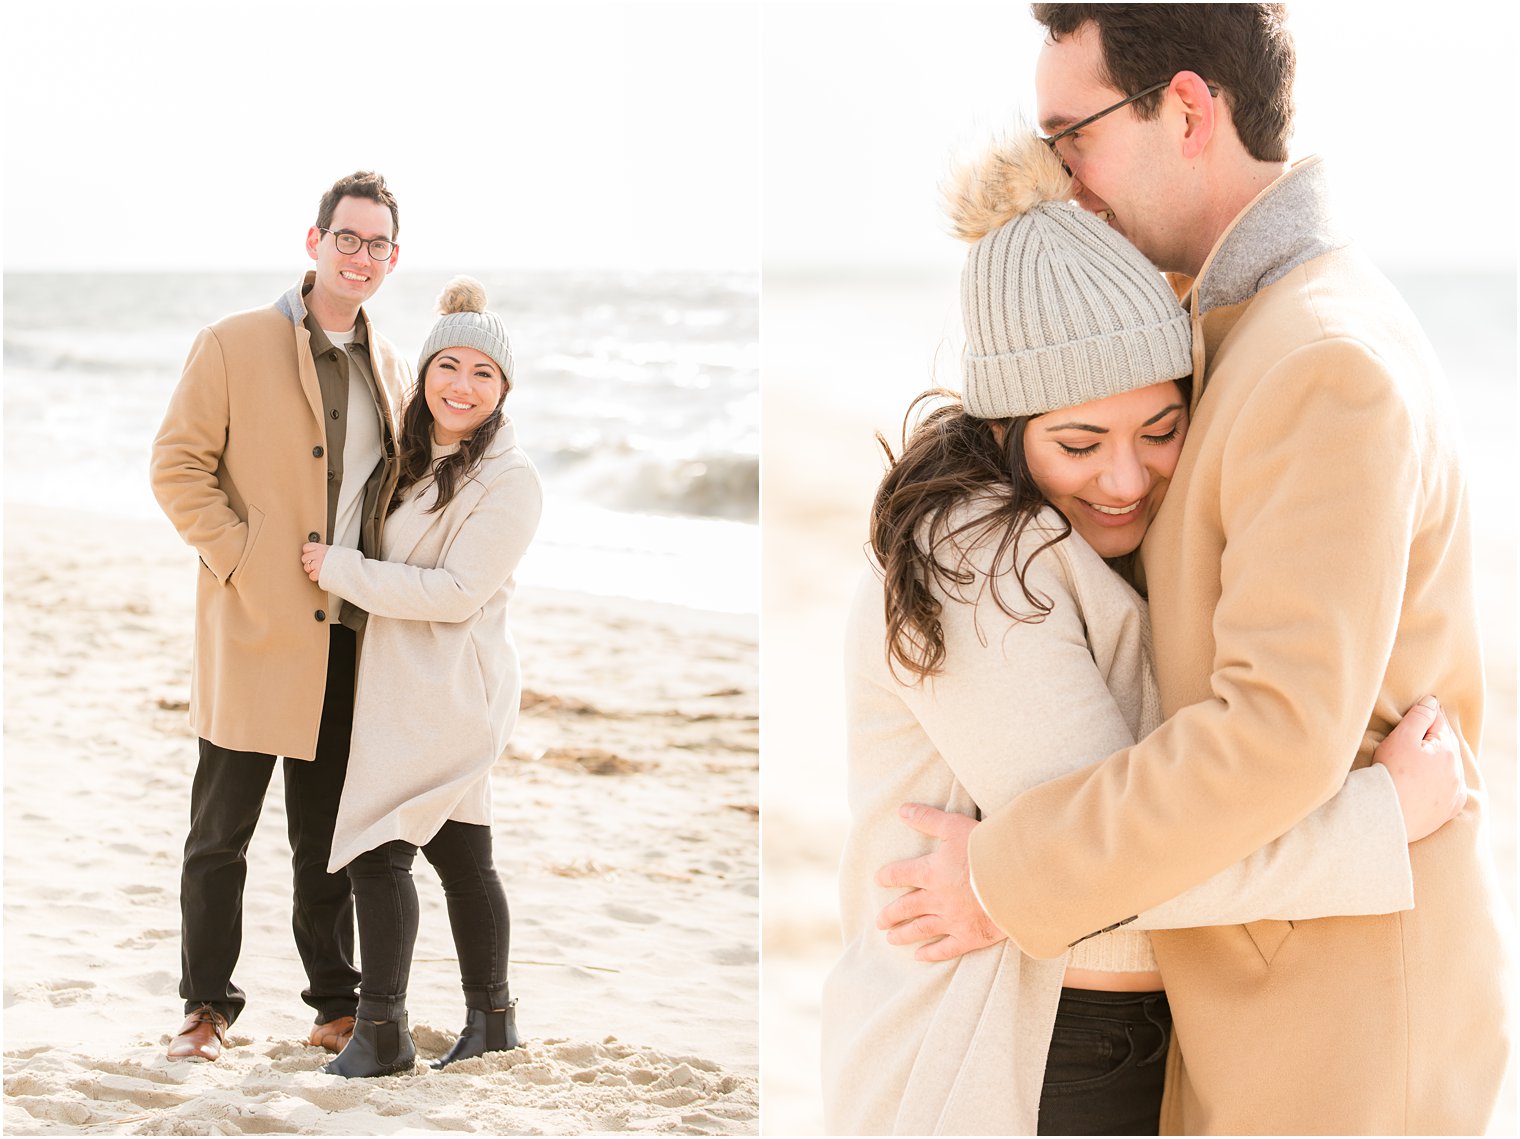 Engaged couple wearing winter coats and hat